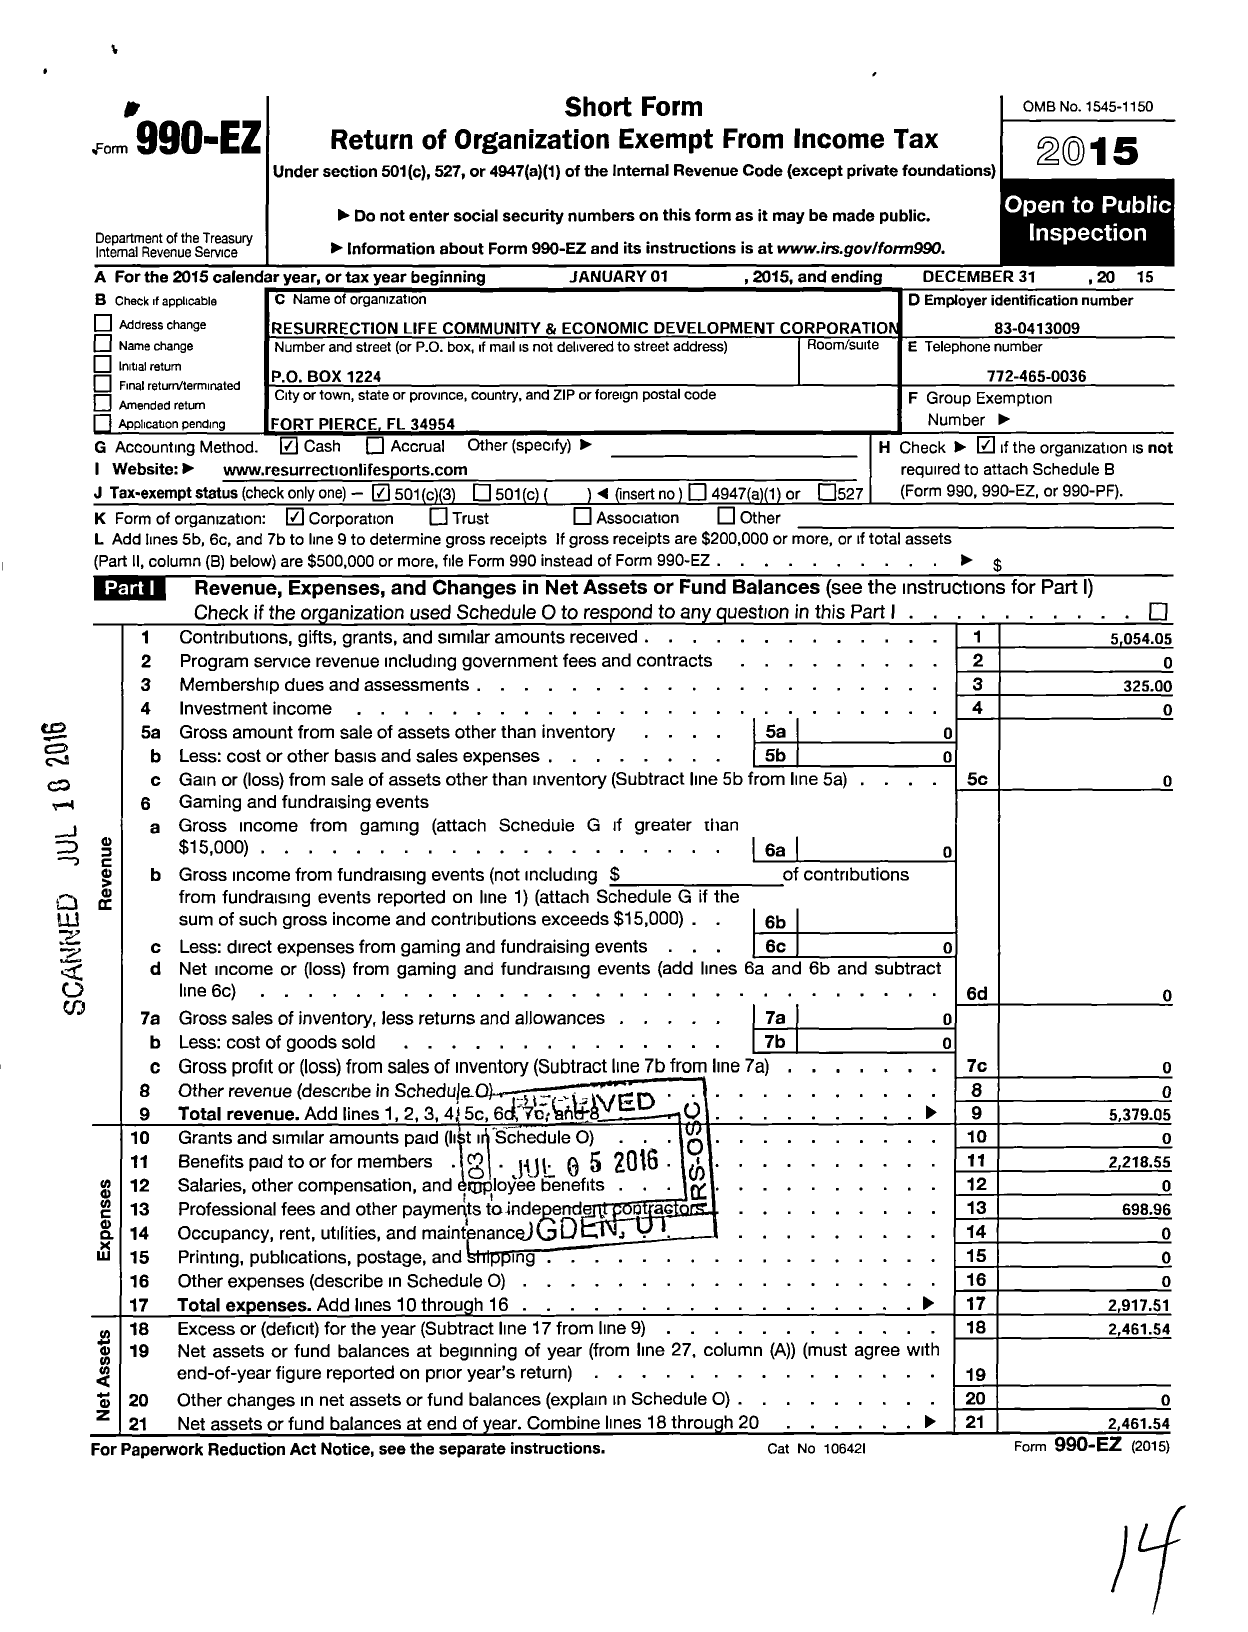 Image of first page of 2015 Form 990EZ for Resurrection Life Community and Economic Development Corporation